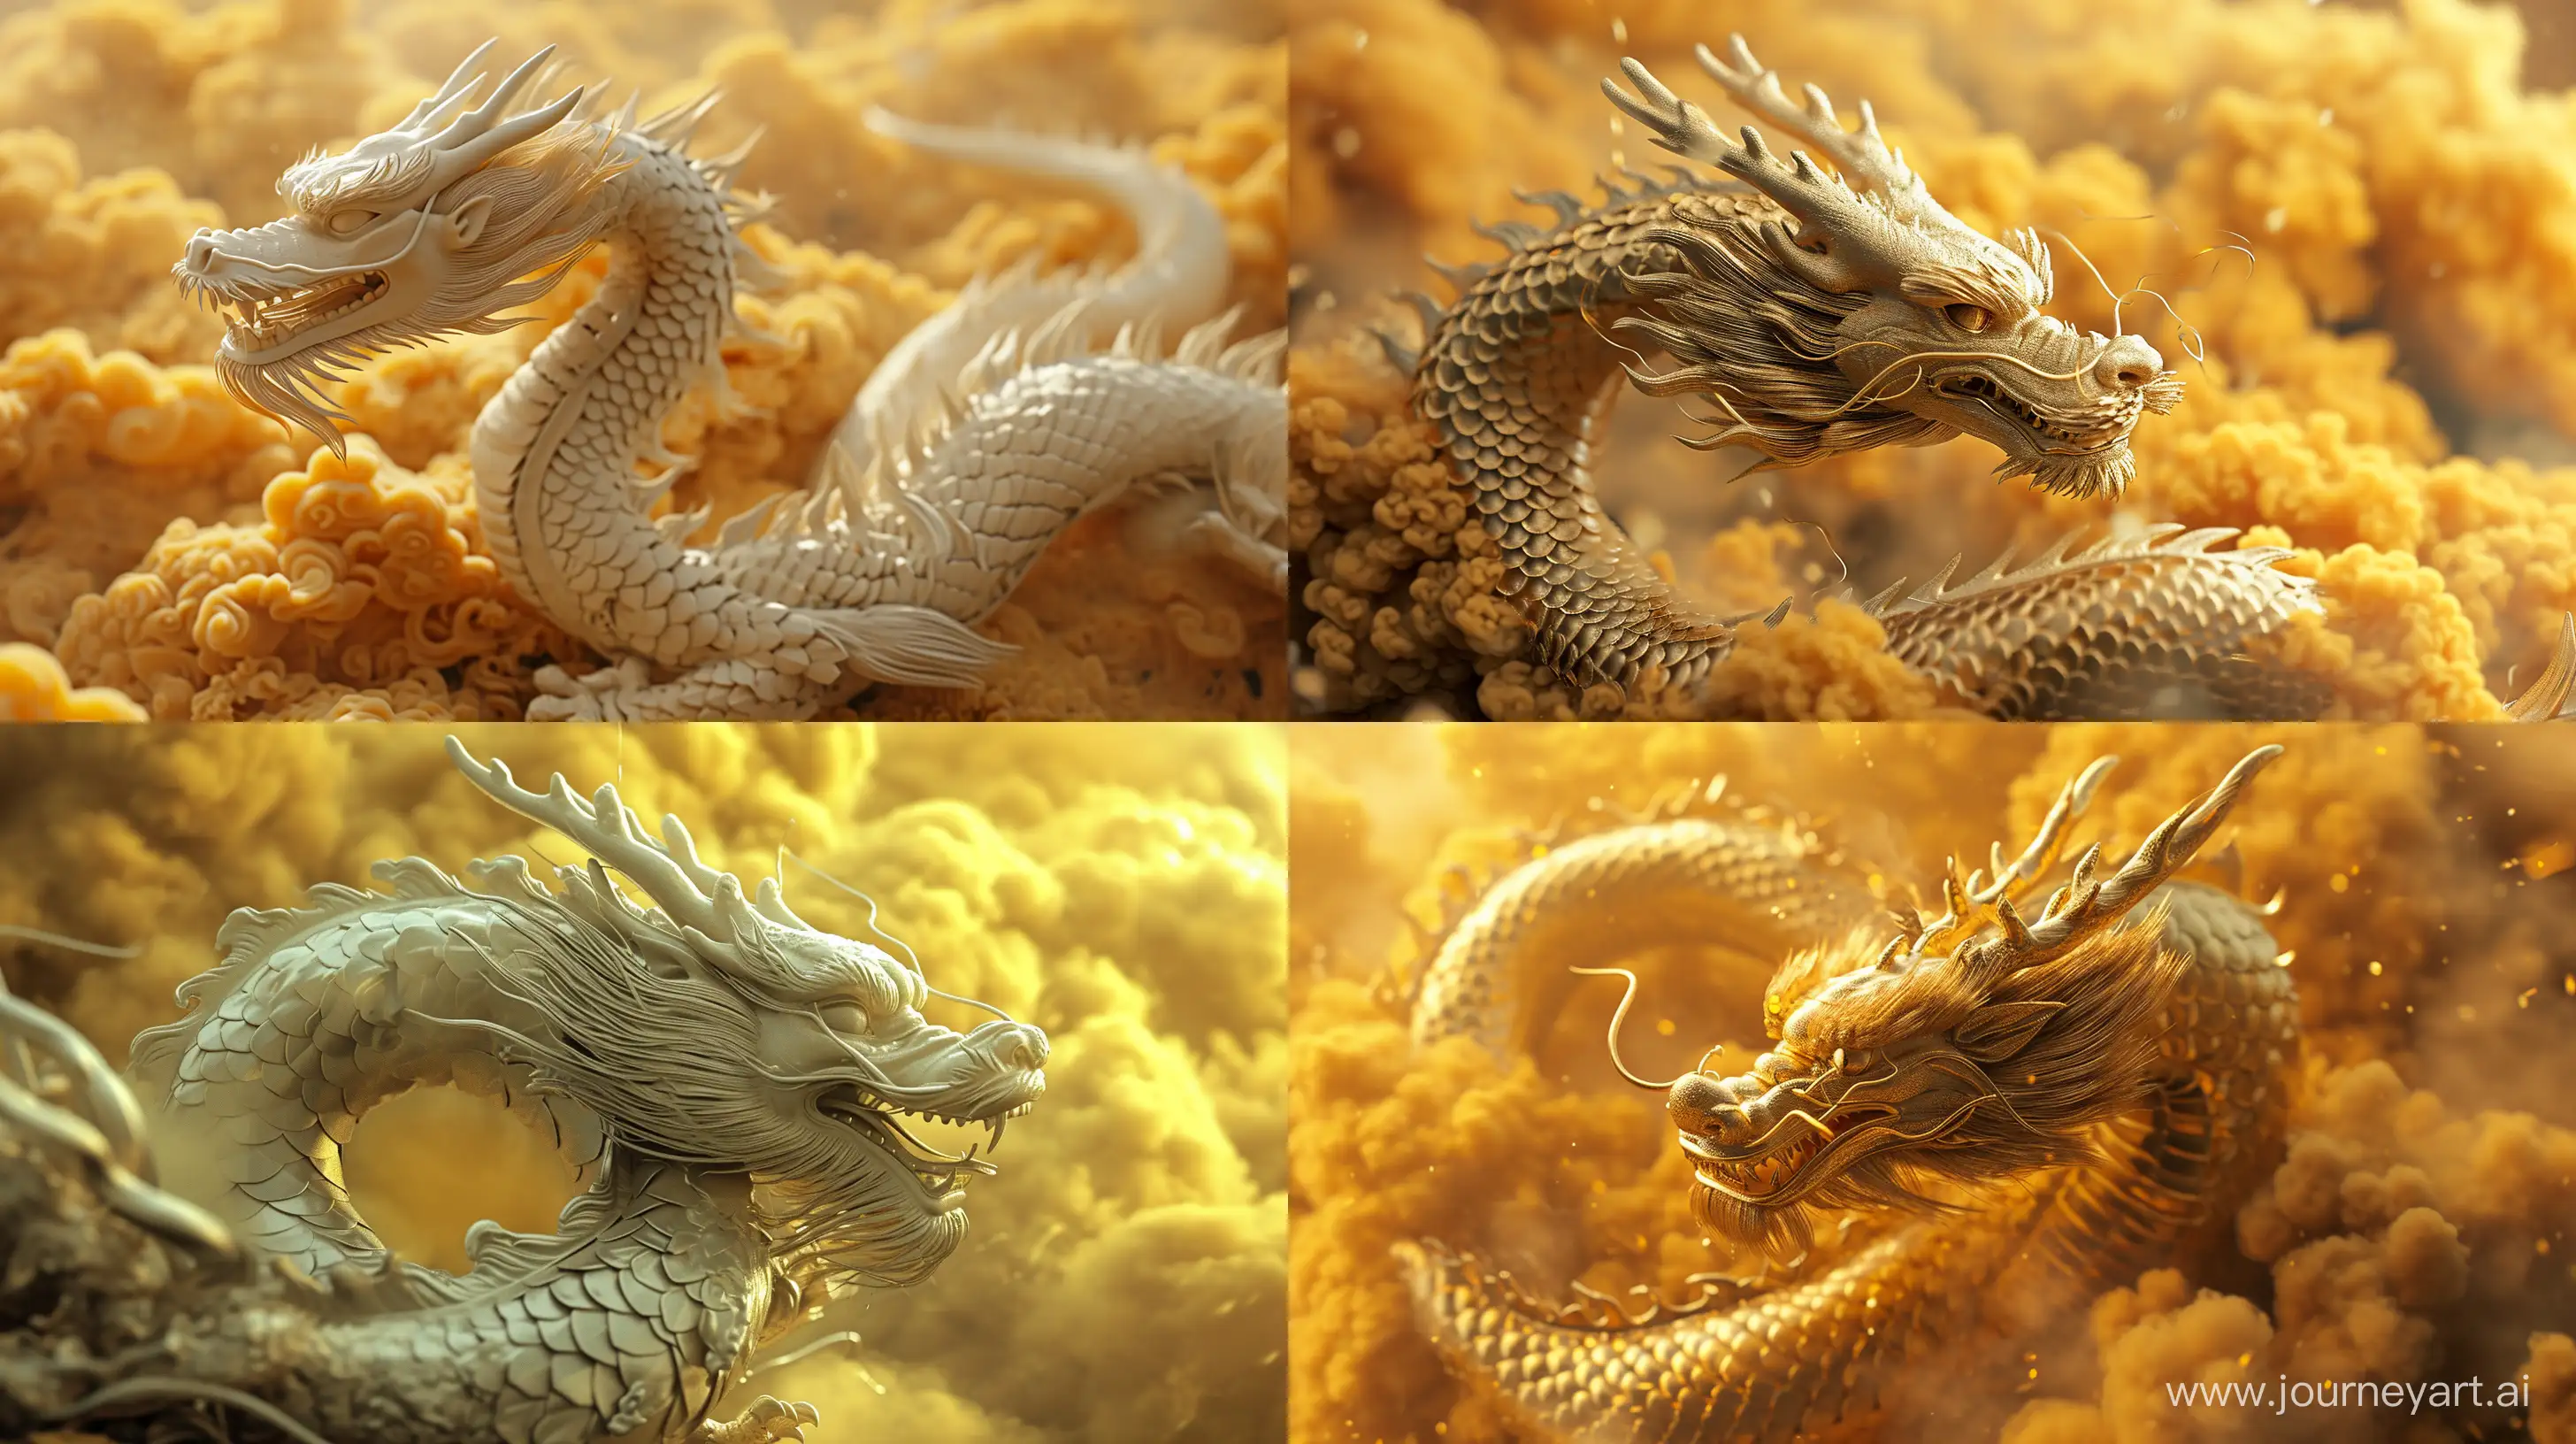 Golden-Chinese-Dragon-Soaring-Through-Illusory-Clouds-in-Hyperrealistic-Style